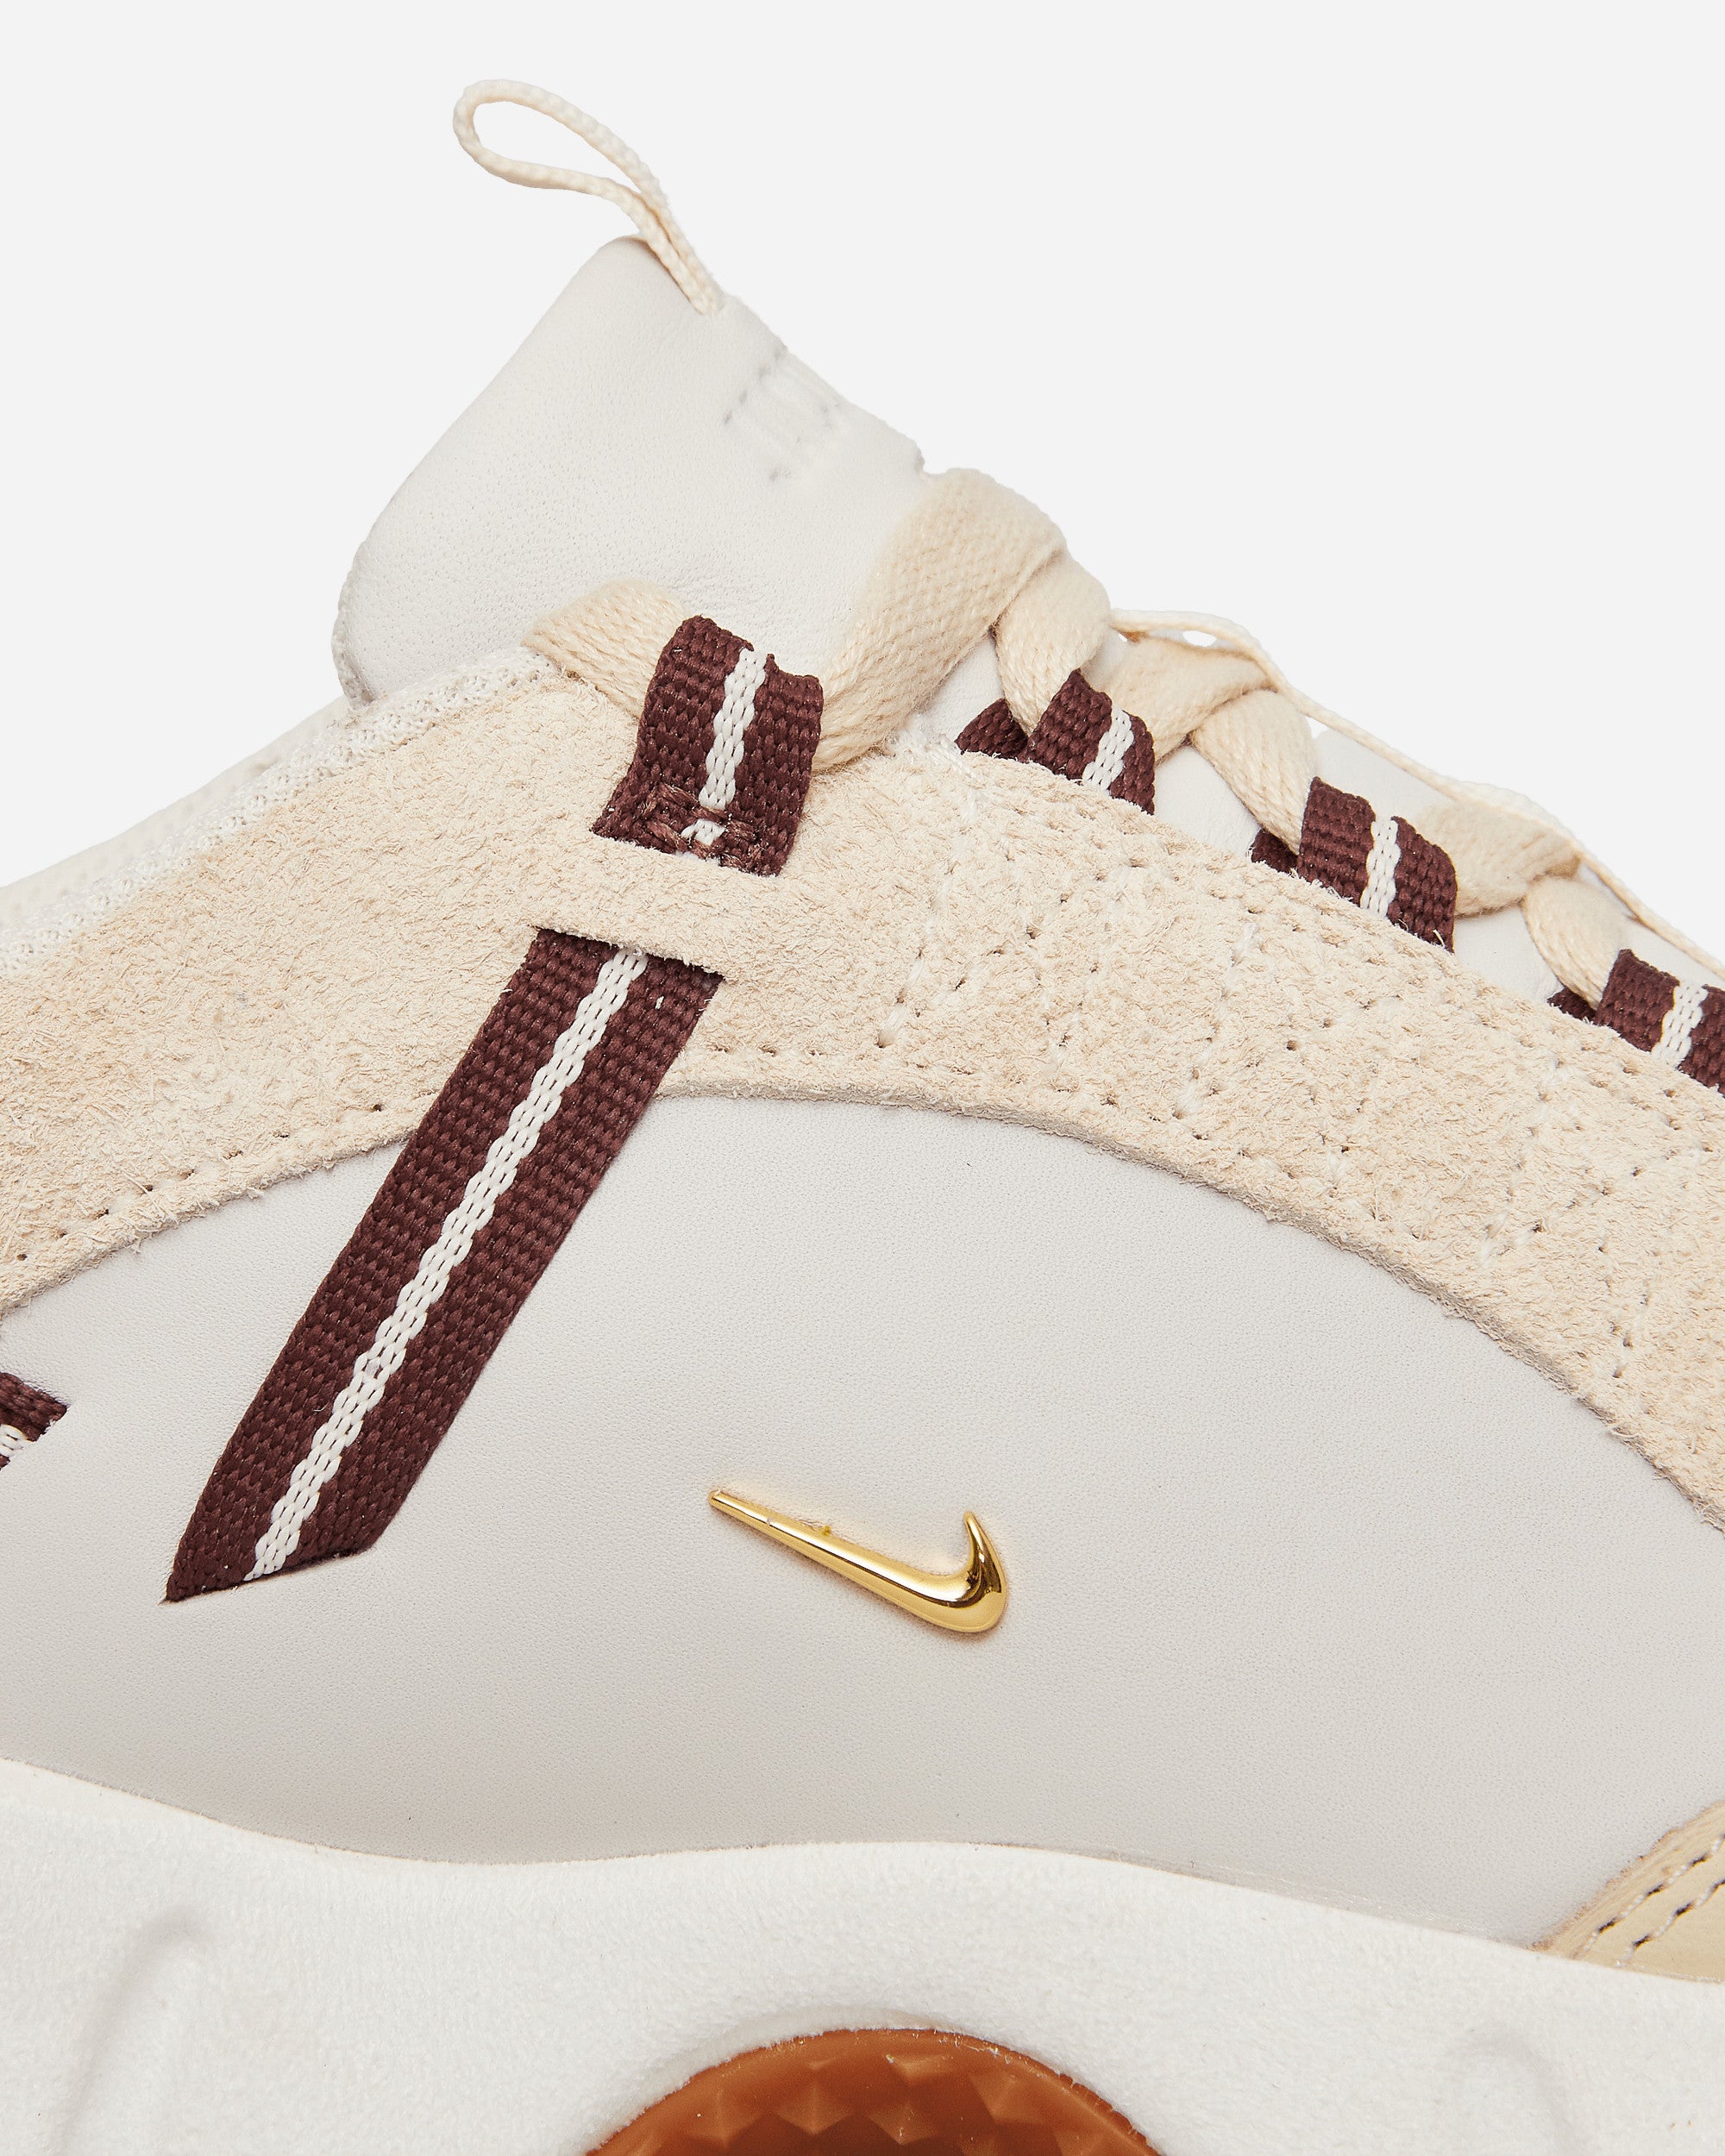 Nike Special Project Wmns Air Humara Lx Light Bone/Gold Sneakers Low DR0420-001